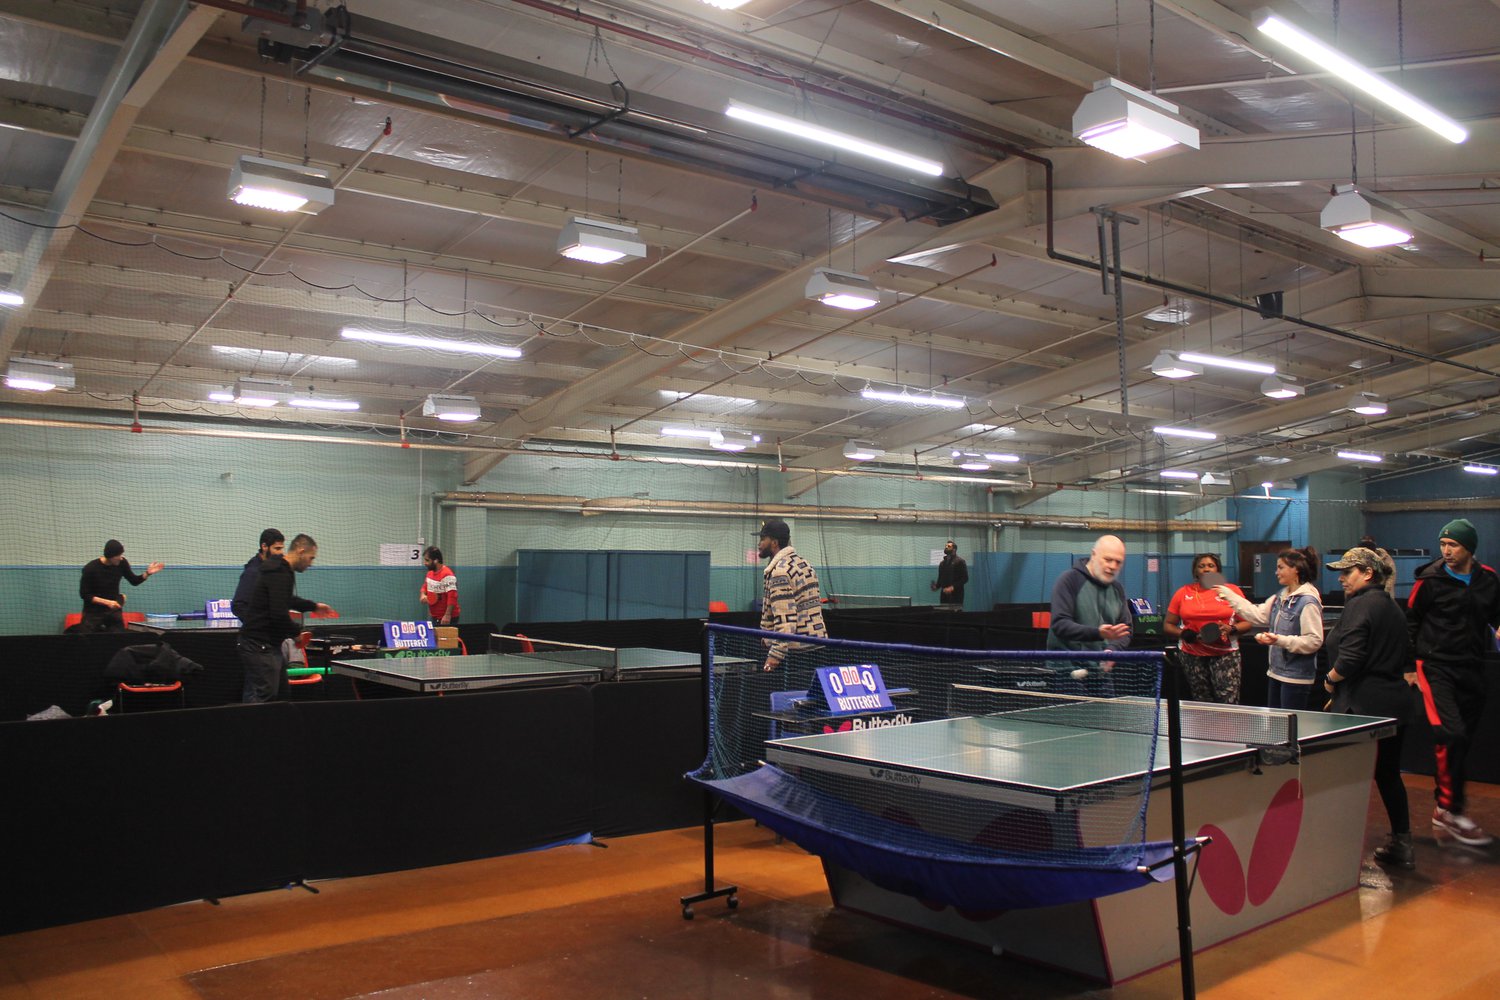 A group of 9 people playing table tennis indoors